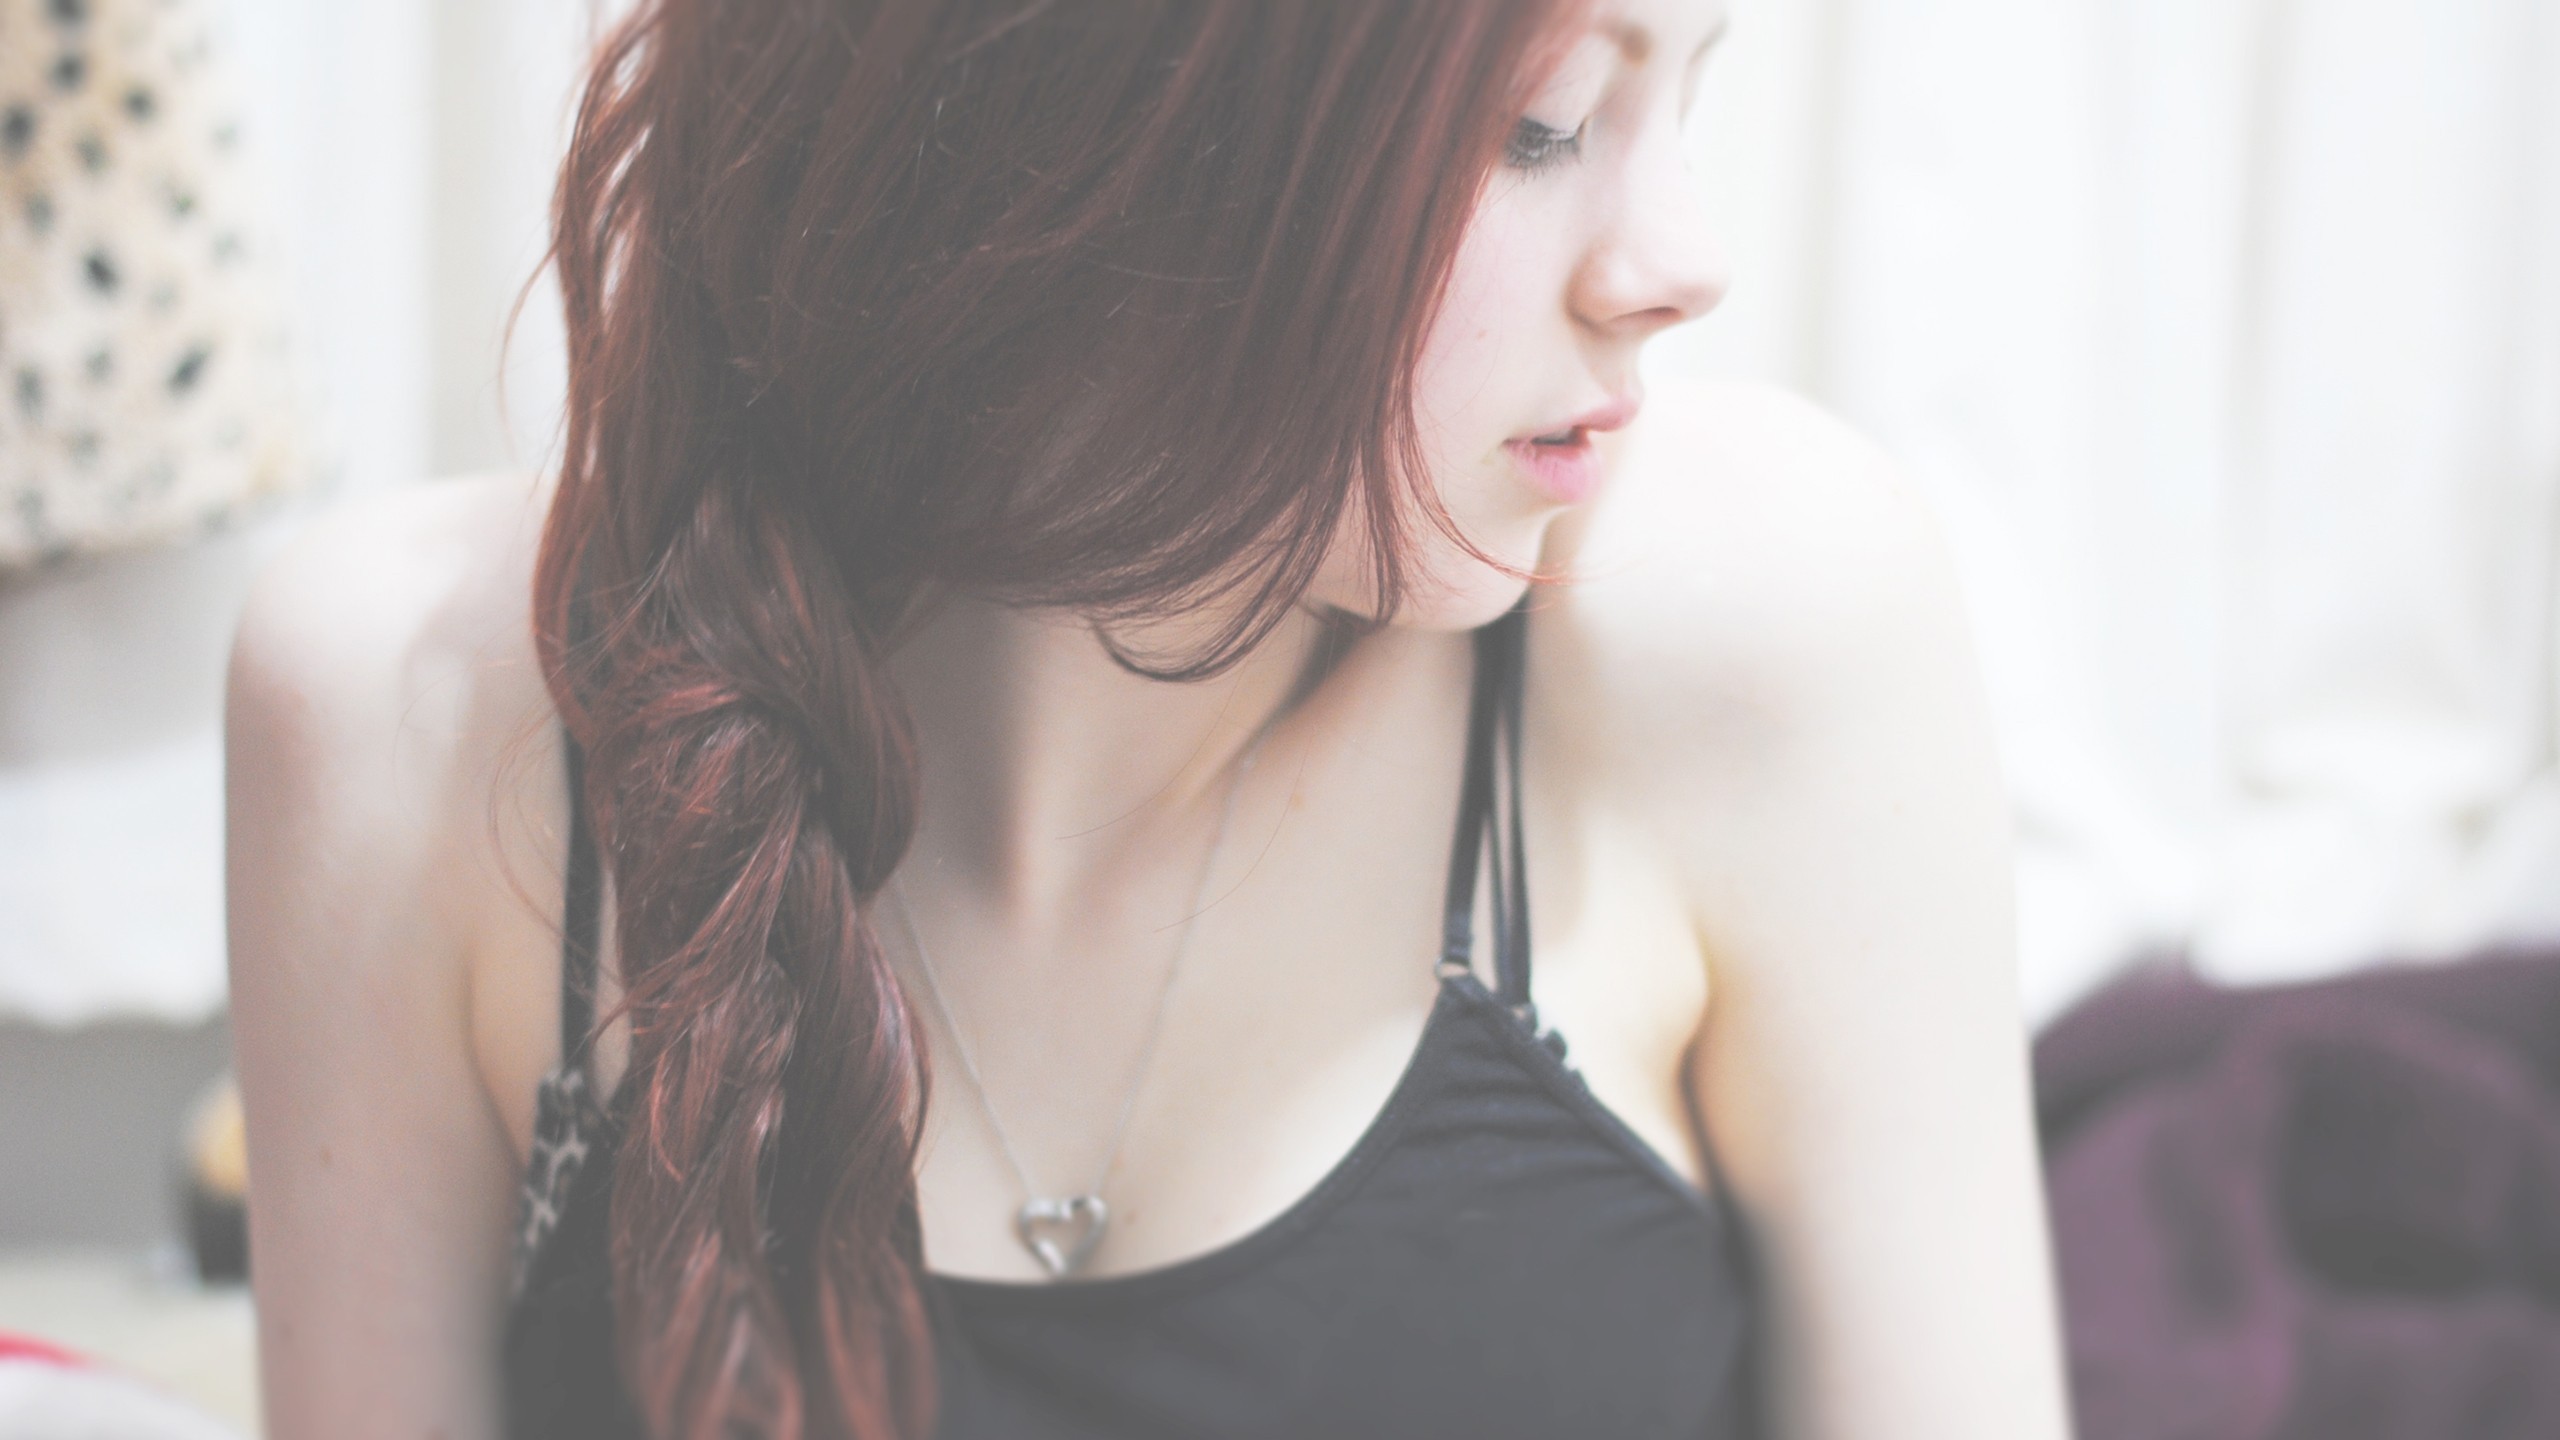 Redhead Women Redhead Long Hair Looking Away Open Mouth Necklace Long Hair Heart Necklace 2560x1440